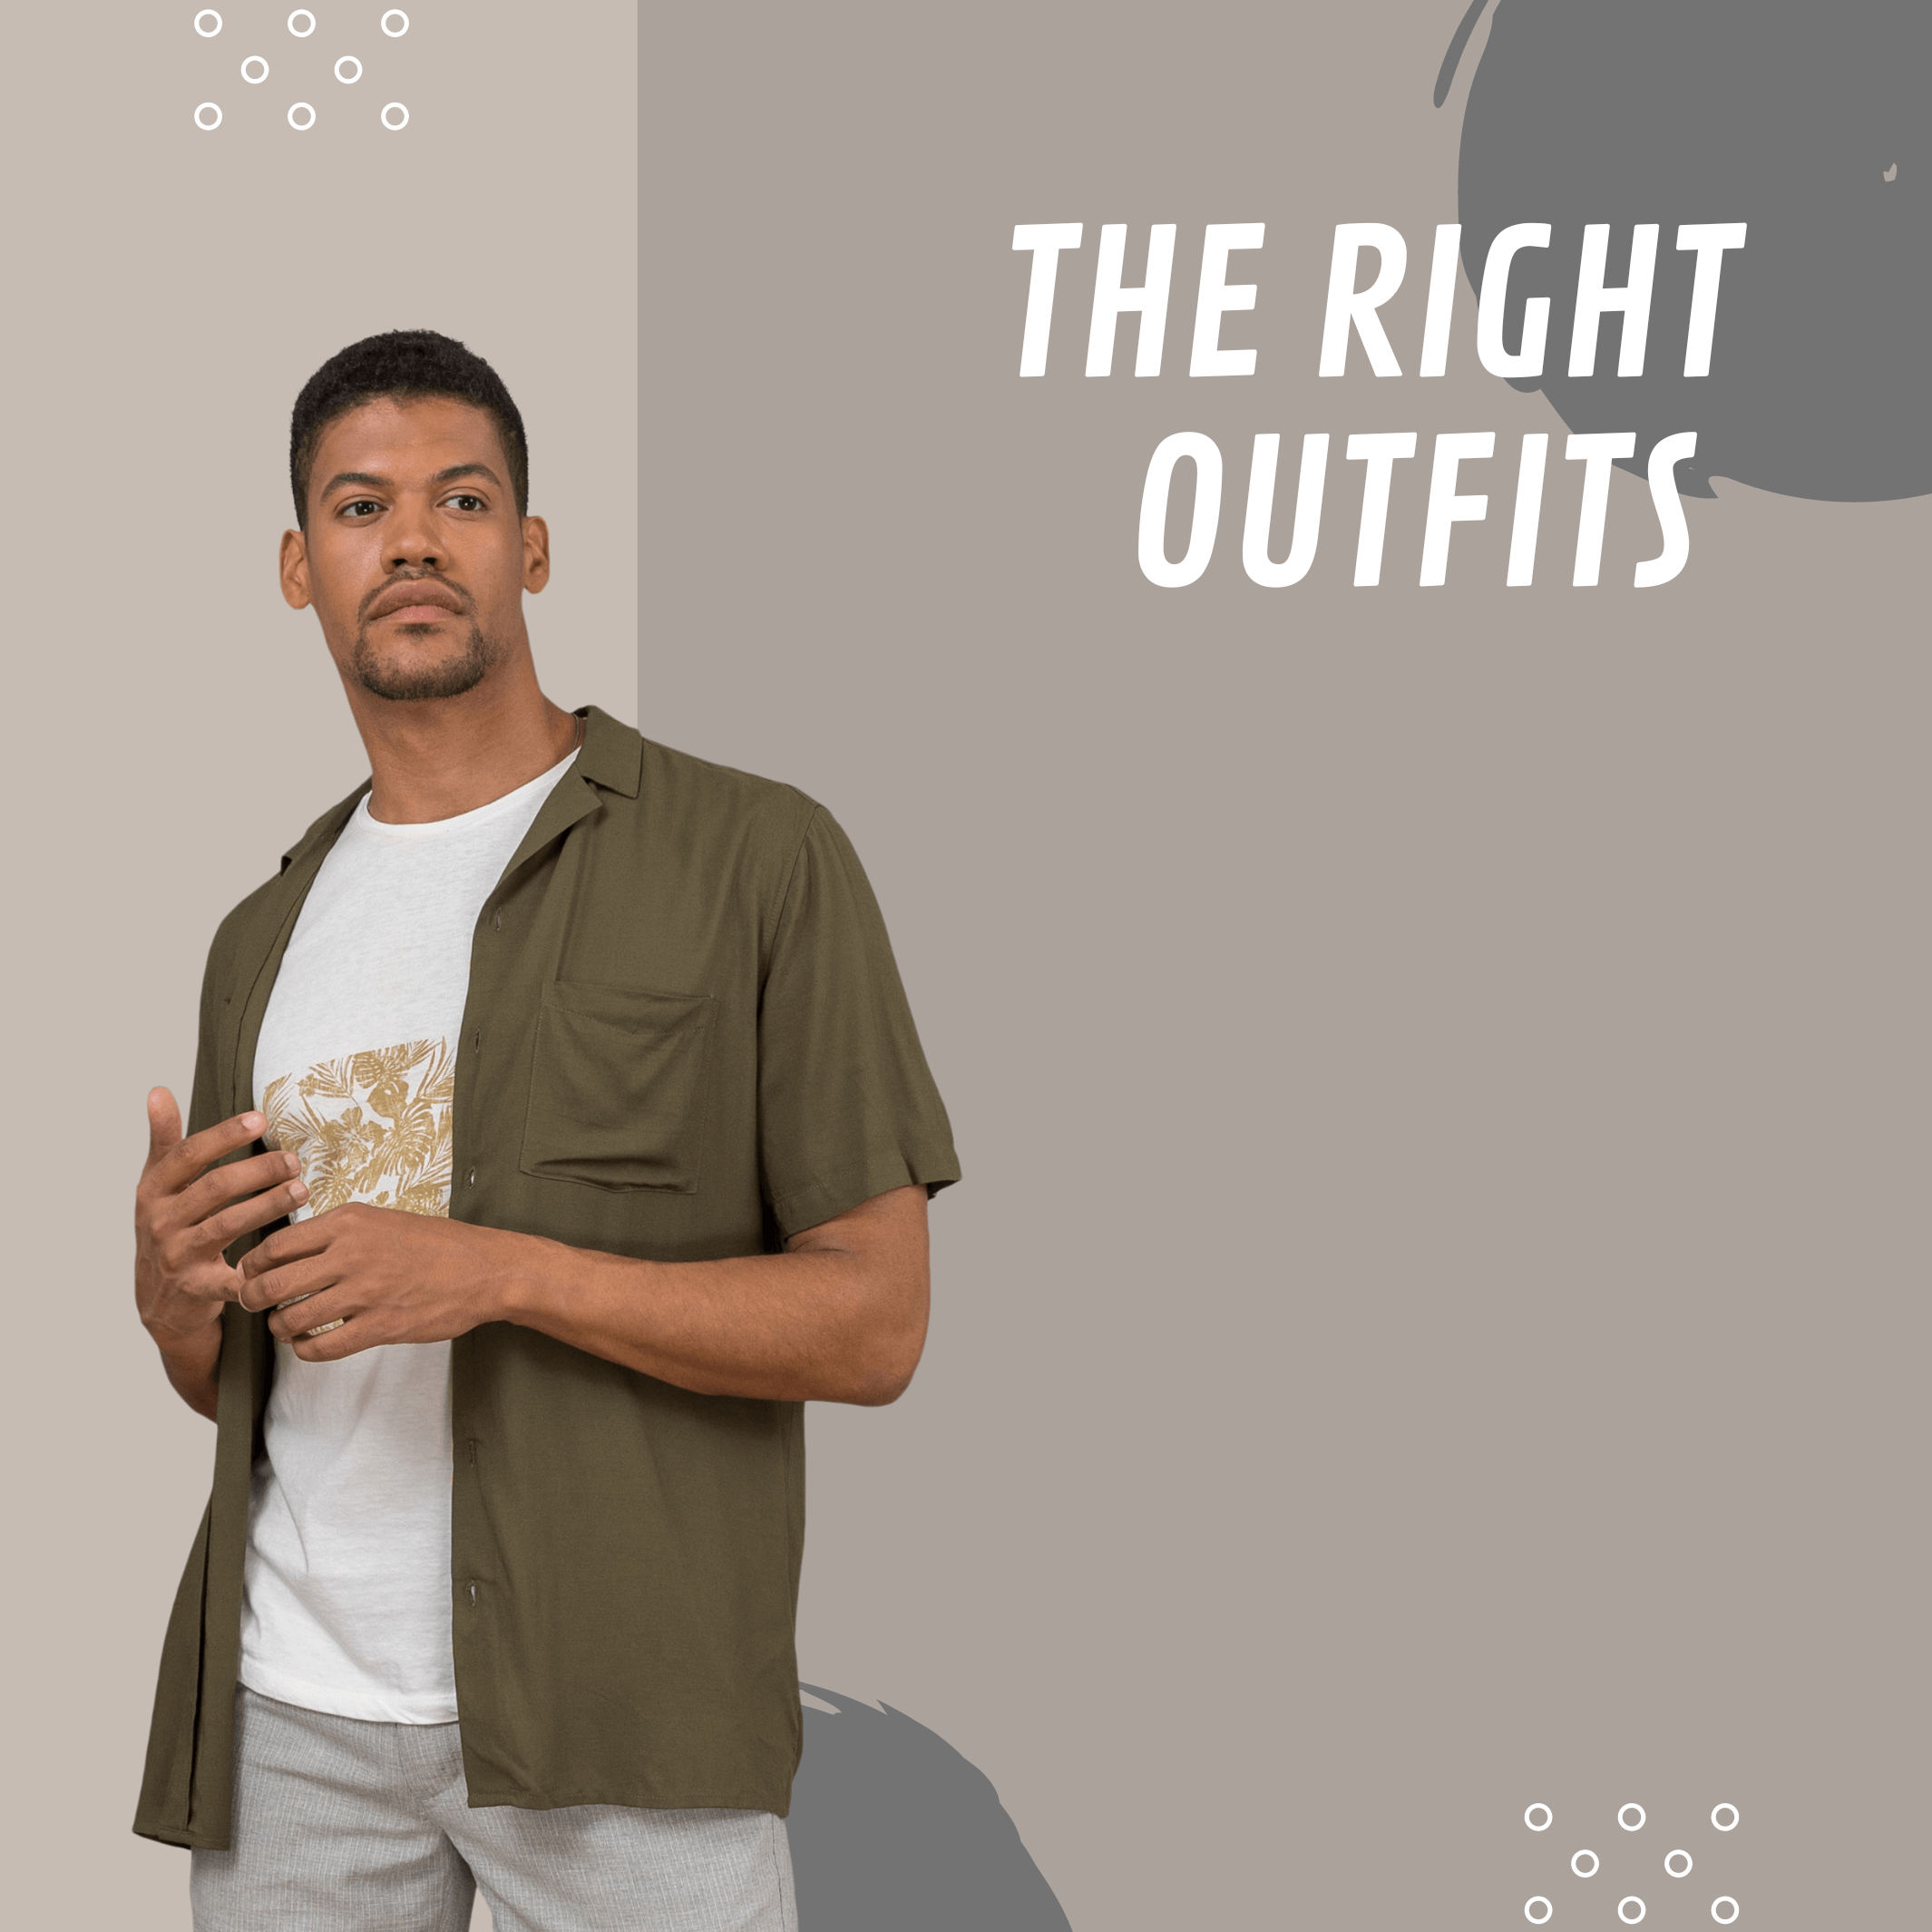 The right outfit for men's fashion